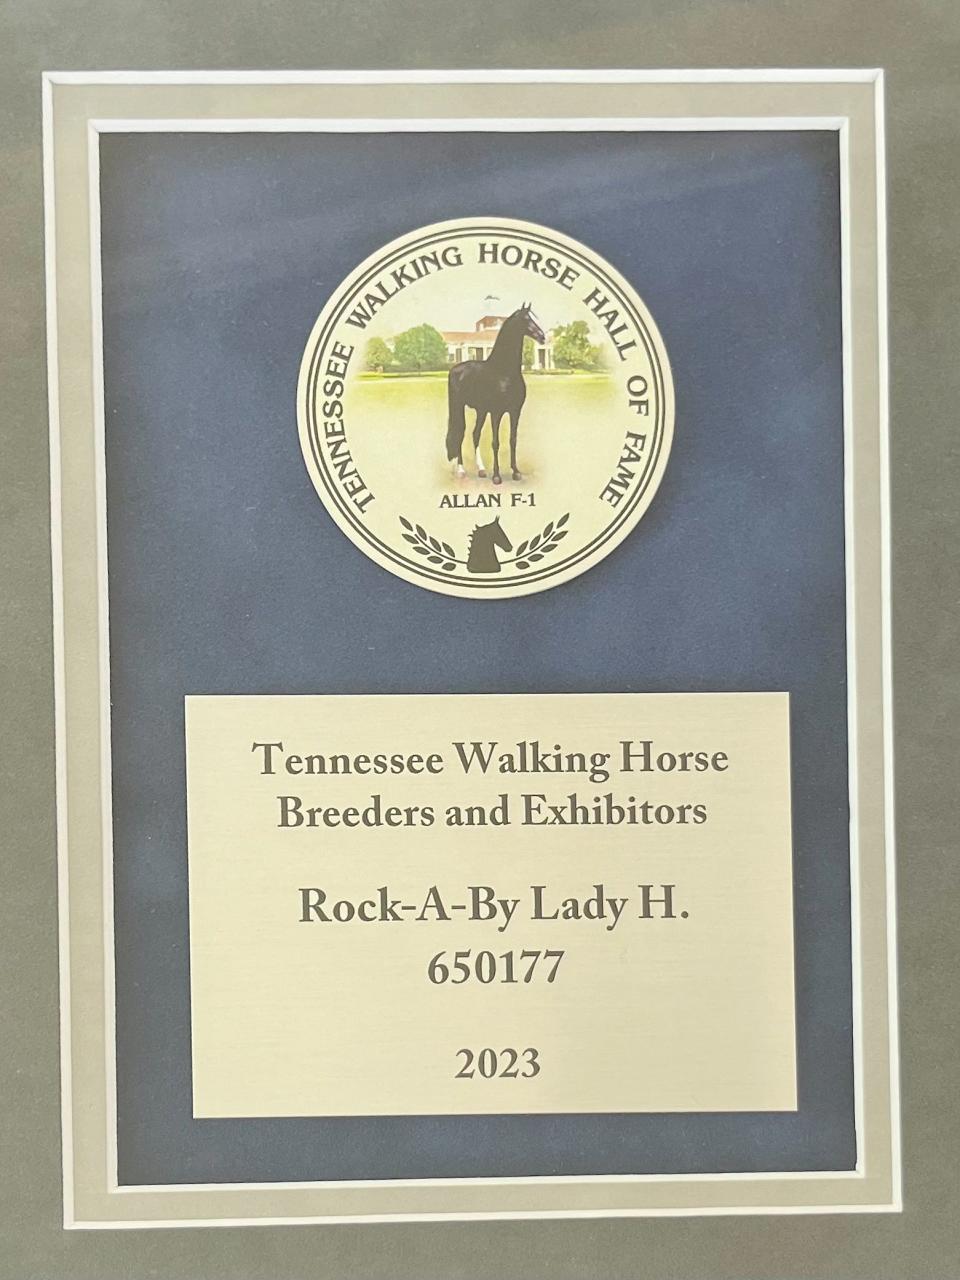 Rock-A-Bye Lady's plaque for the Tennessee Walking Horse Breeders and Exhibitors' Association Hall of Fame is pictured. (The plaque carries the mare's original registered name.)